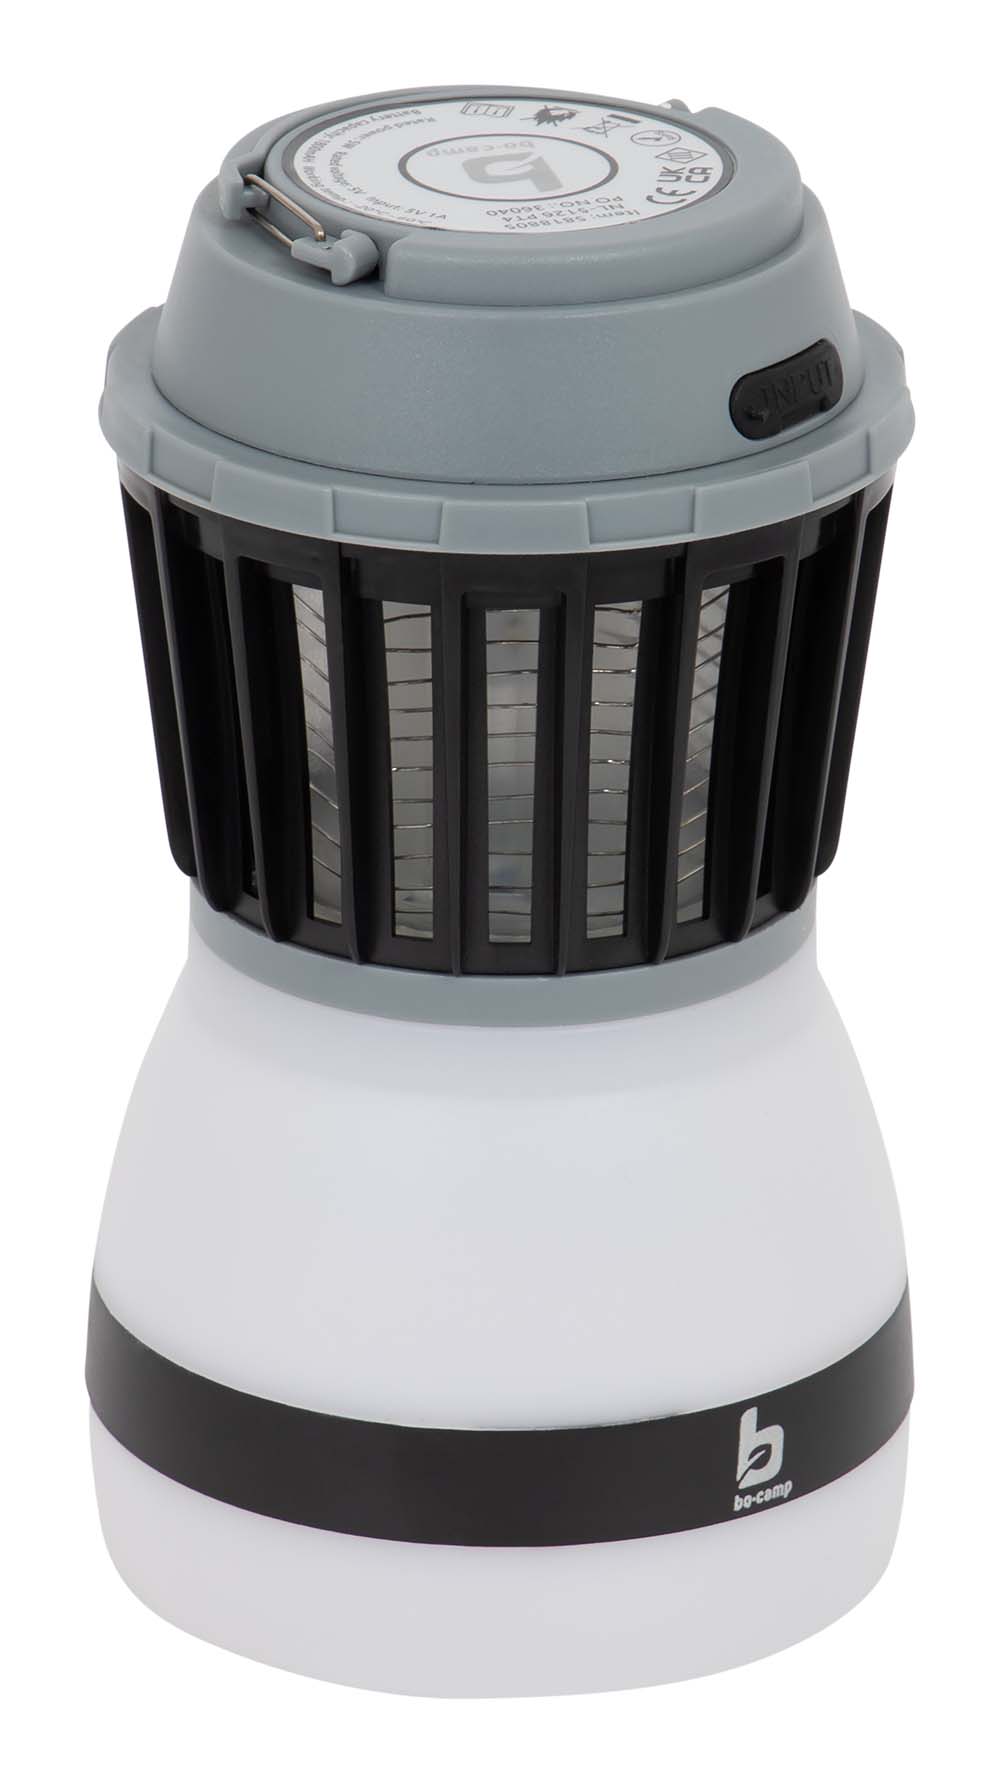 5818805 A multifunctional table lantern with insect lamp. This lantern is rainproof. It can be used in 3 modes (20%, 50% and 100%) and is adjustable in 2 different heights (11 & 17 cm). Furthermore, it comes with a Micro-USB cable.